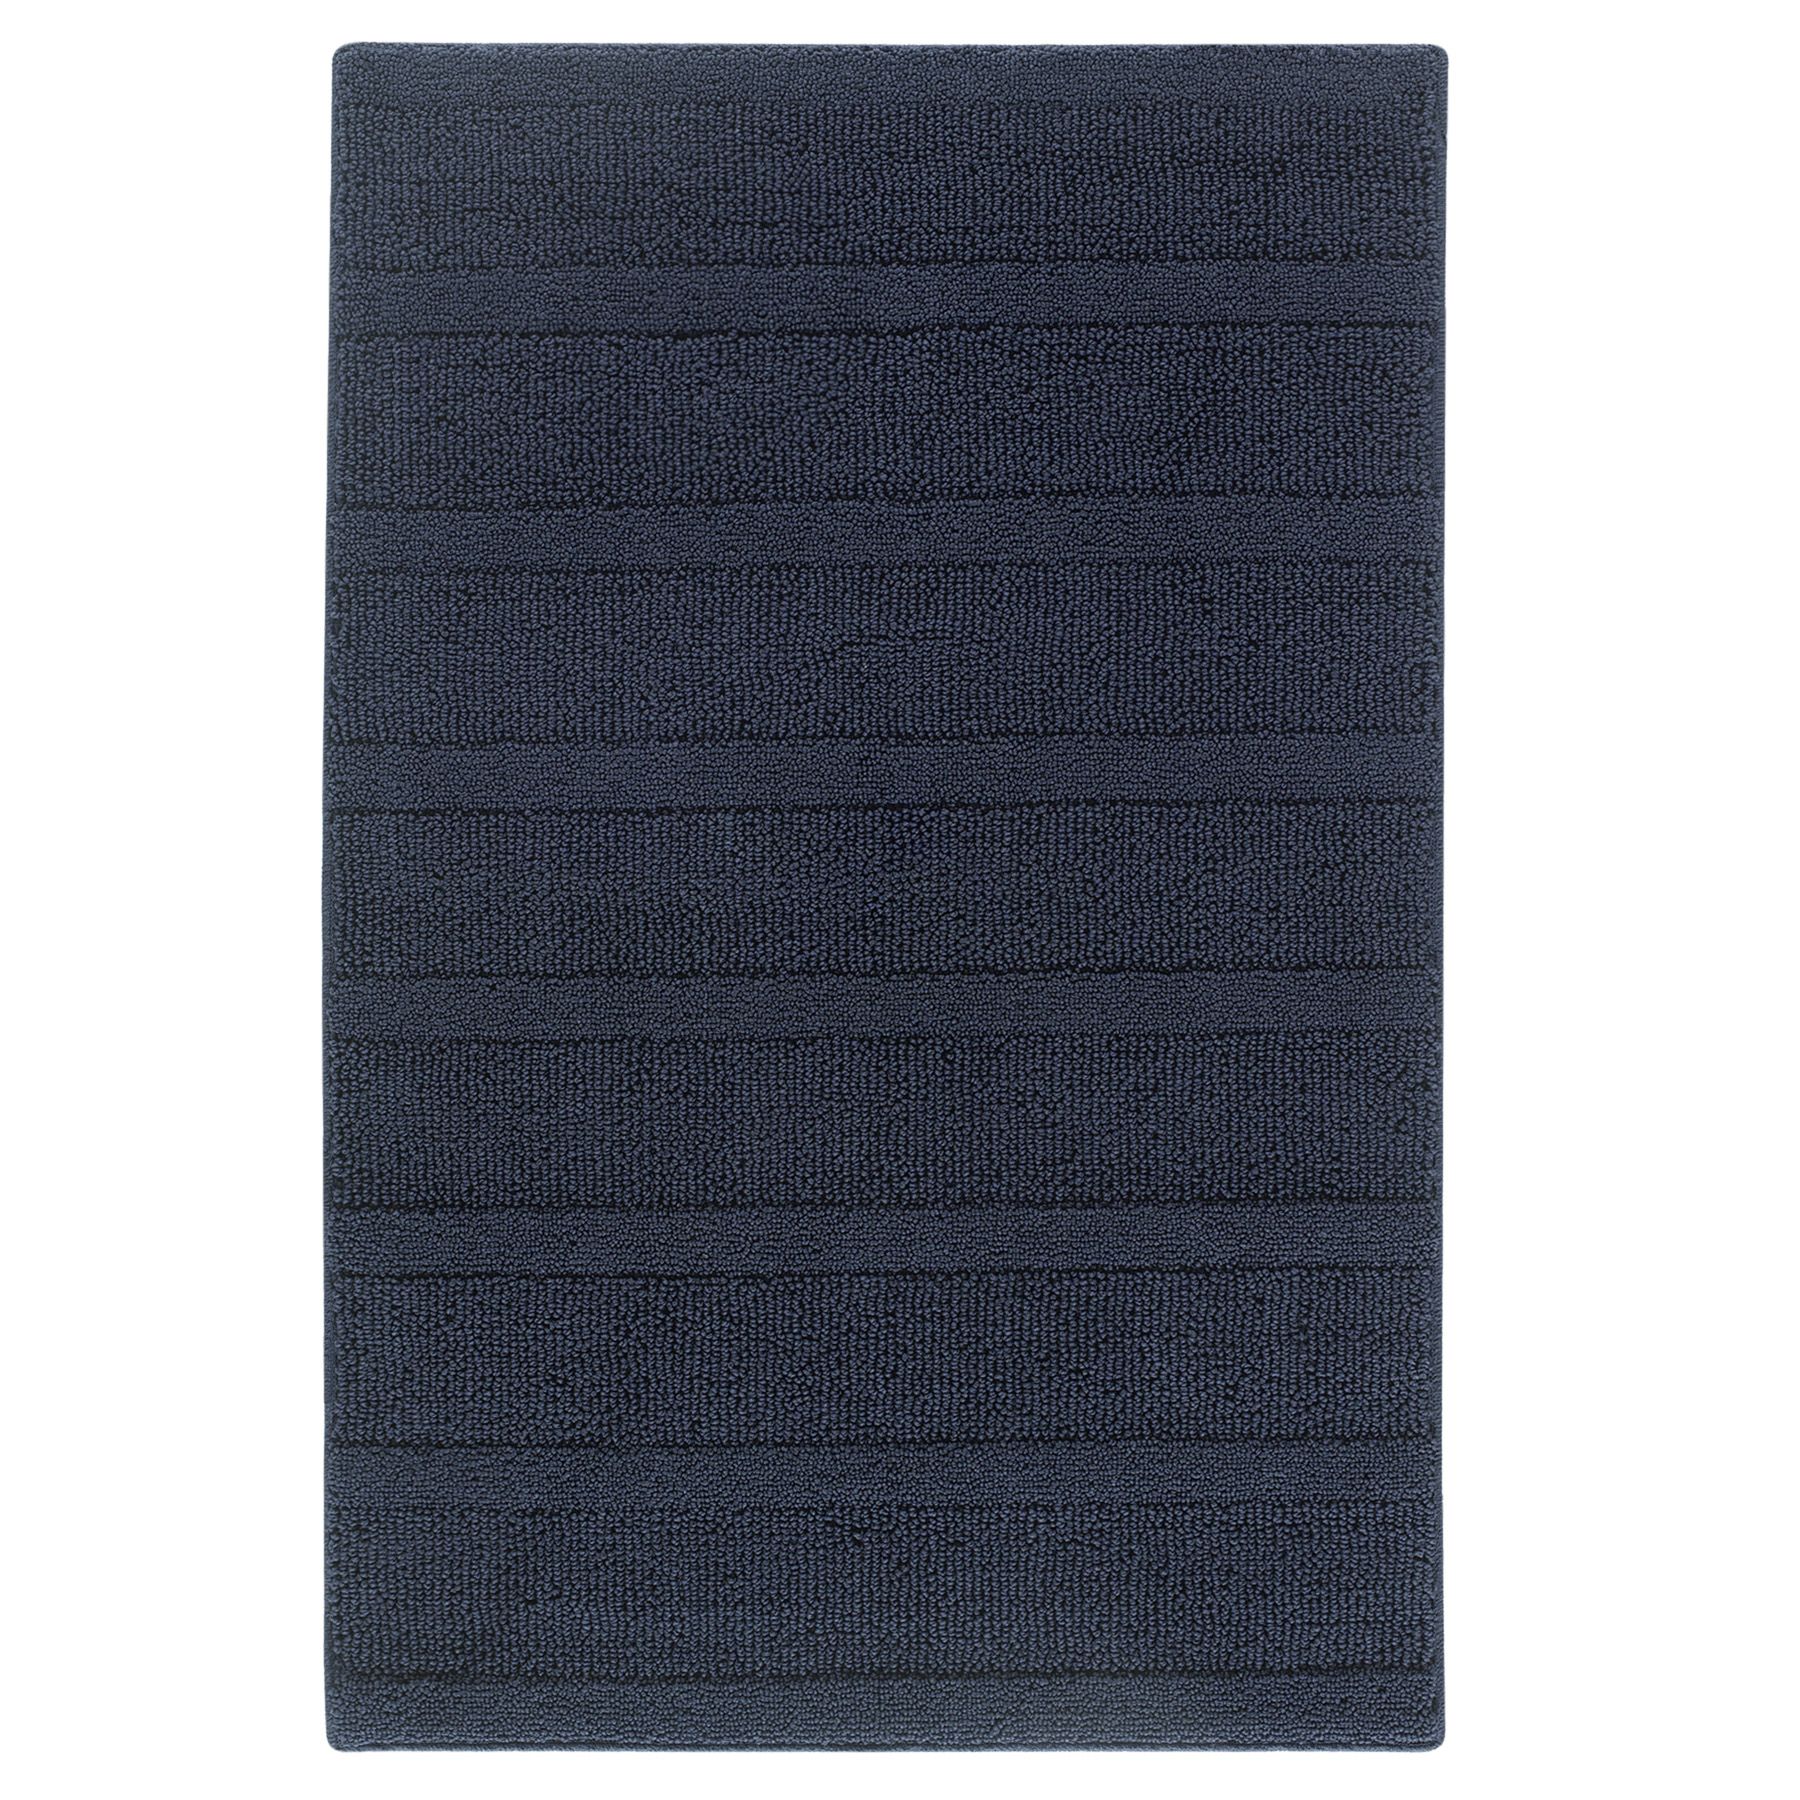 Whole Home Rib Tone Navy Accent Rug